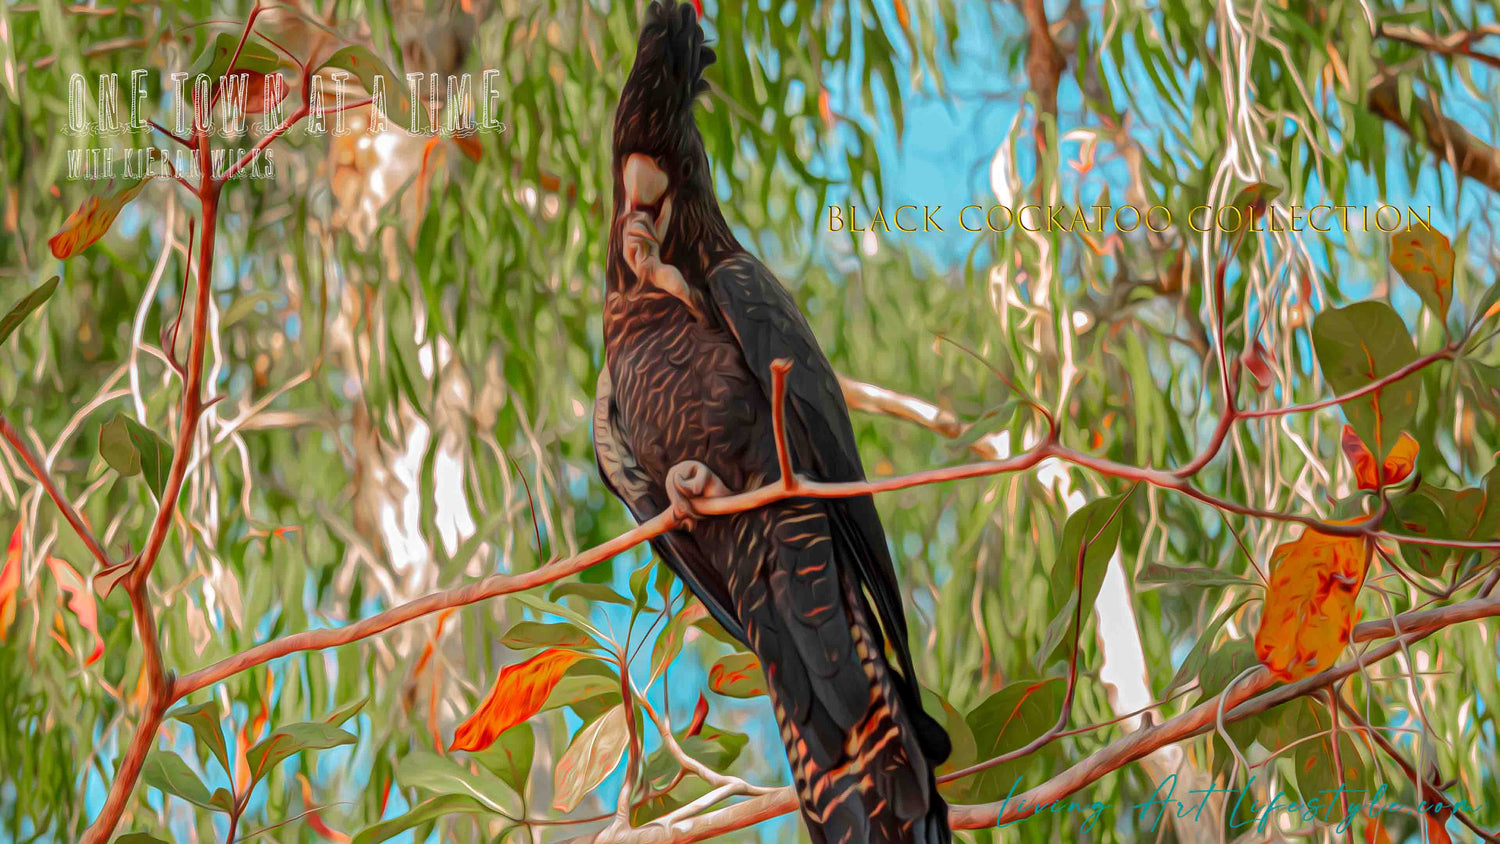 BLACK COCKATOO COLLECTION - RED TAILED RED COCKATOO TOWNSVILLE QLD